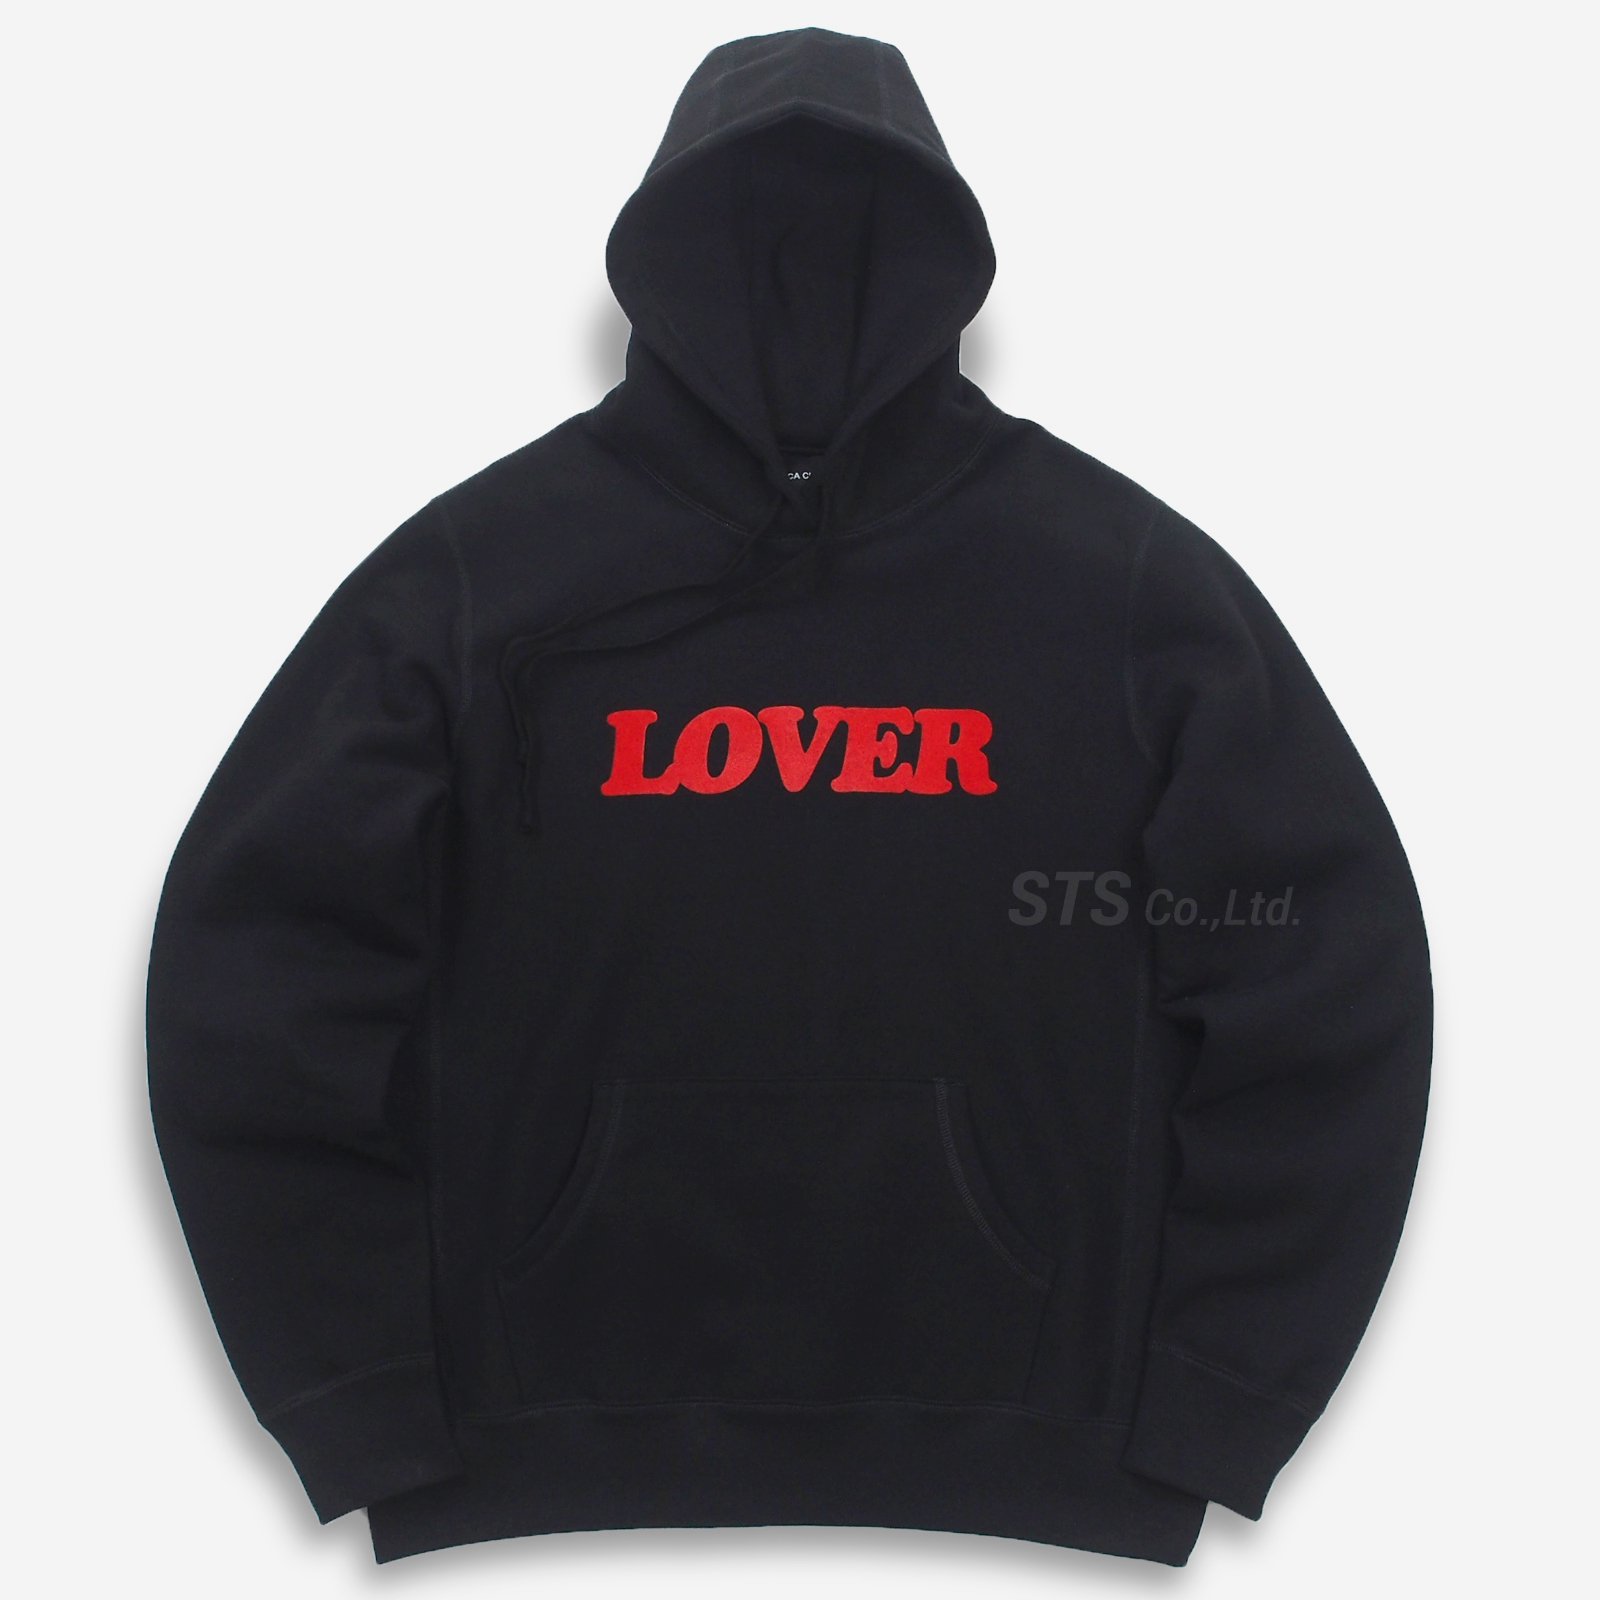 bianca chandon lover pullover hoodie